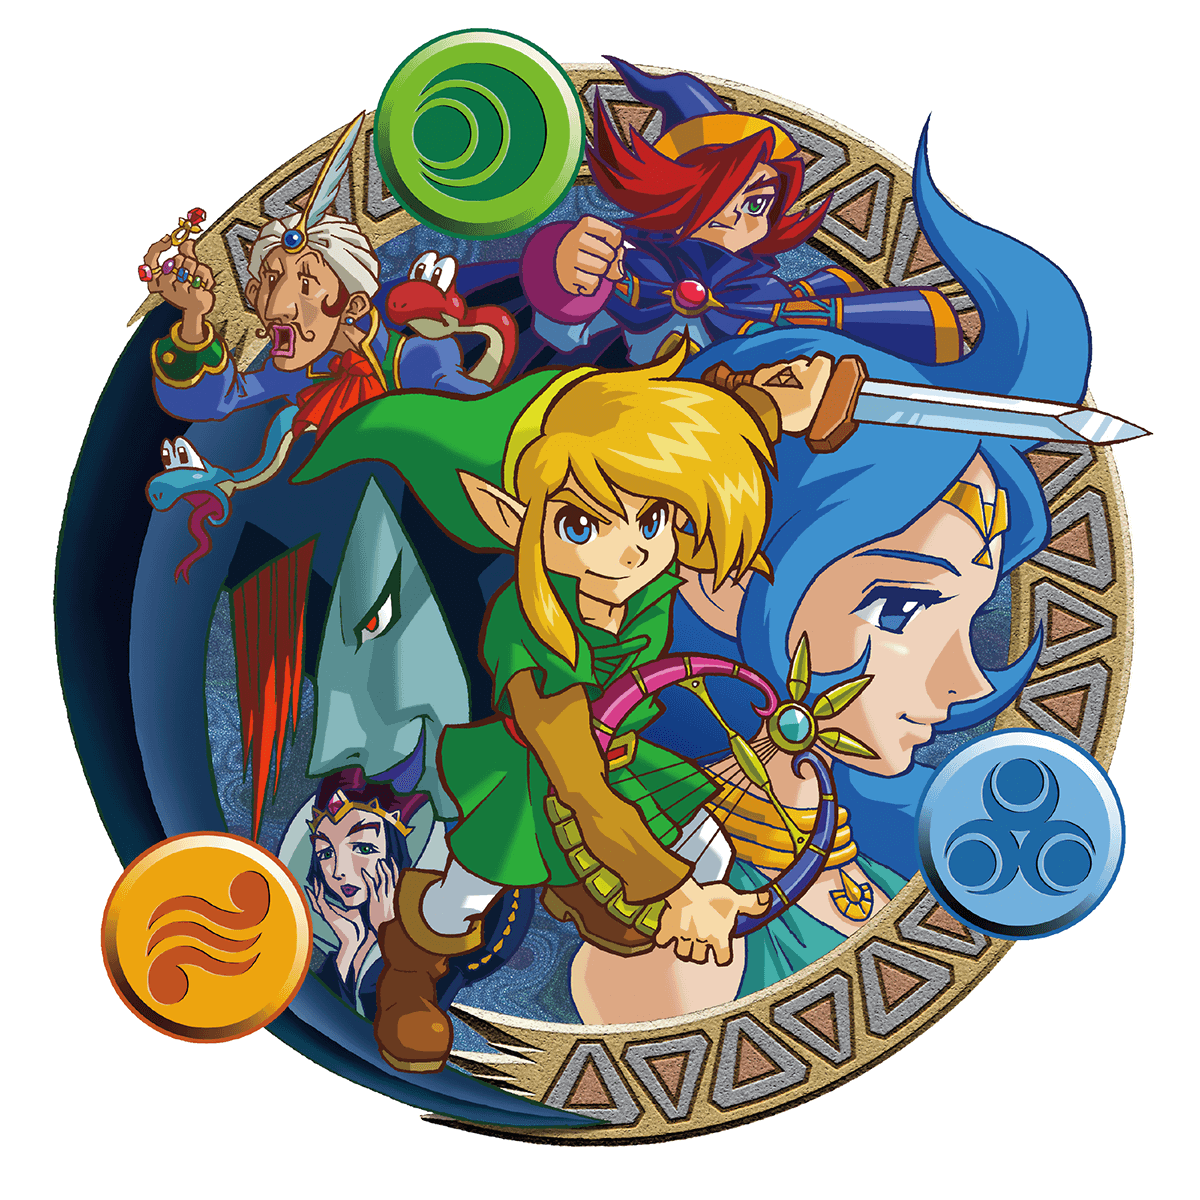 Official art | The Legend of Zelda: Oracle of Ages